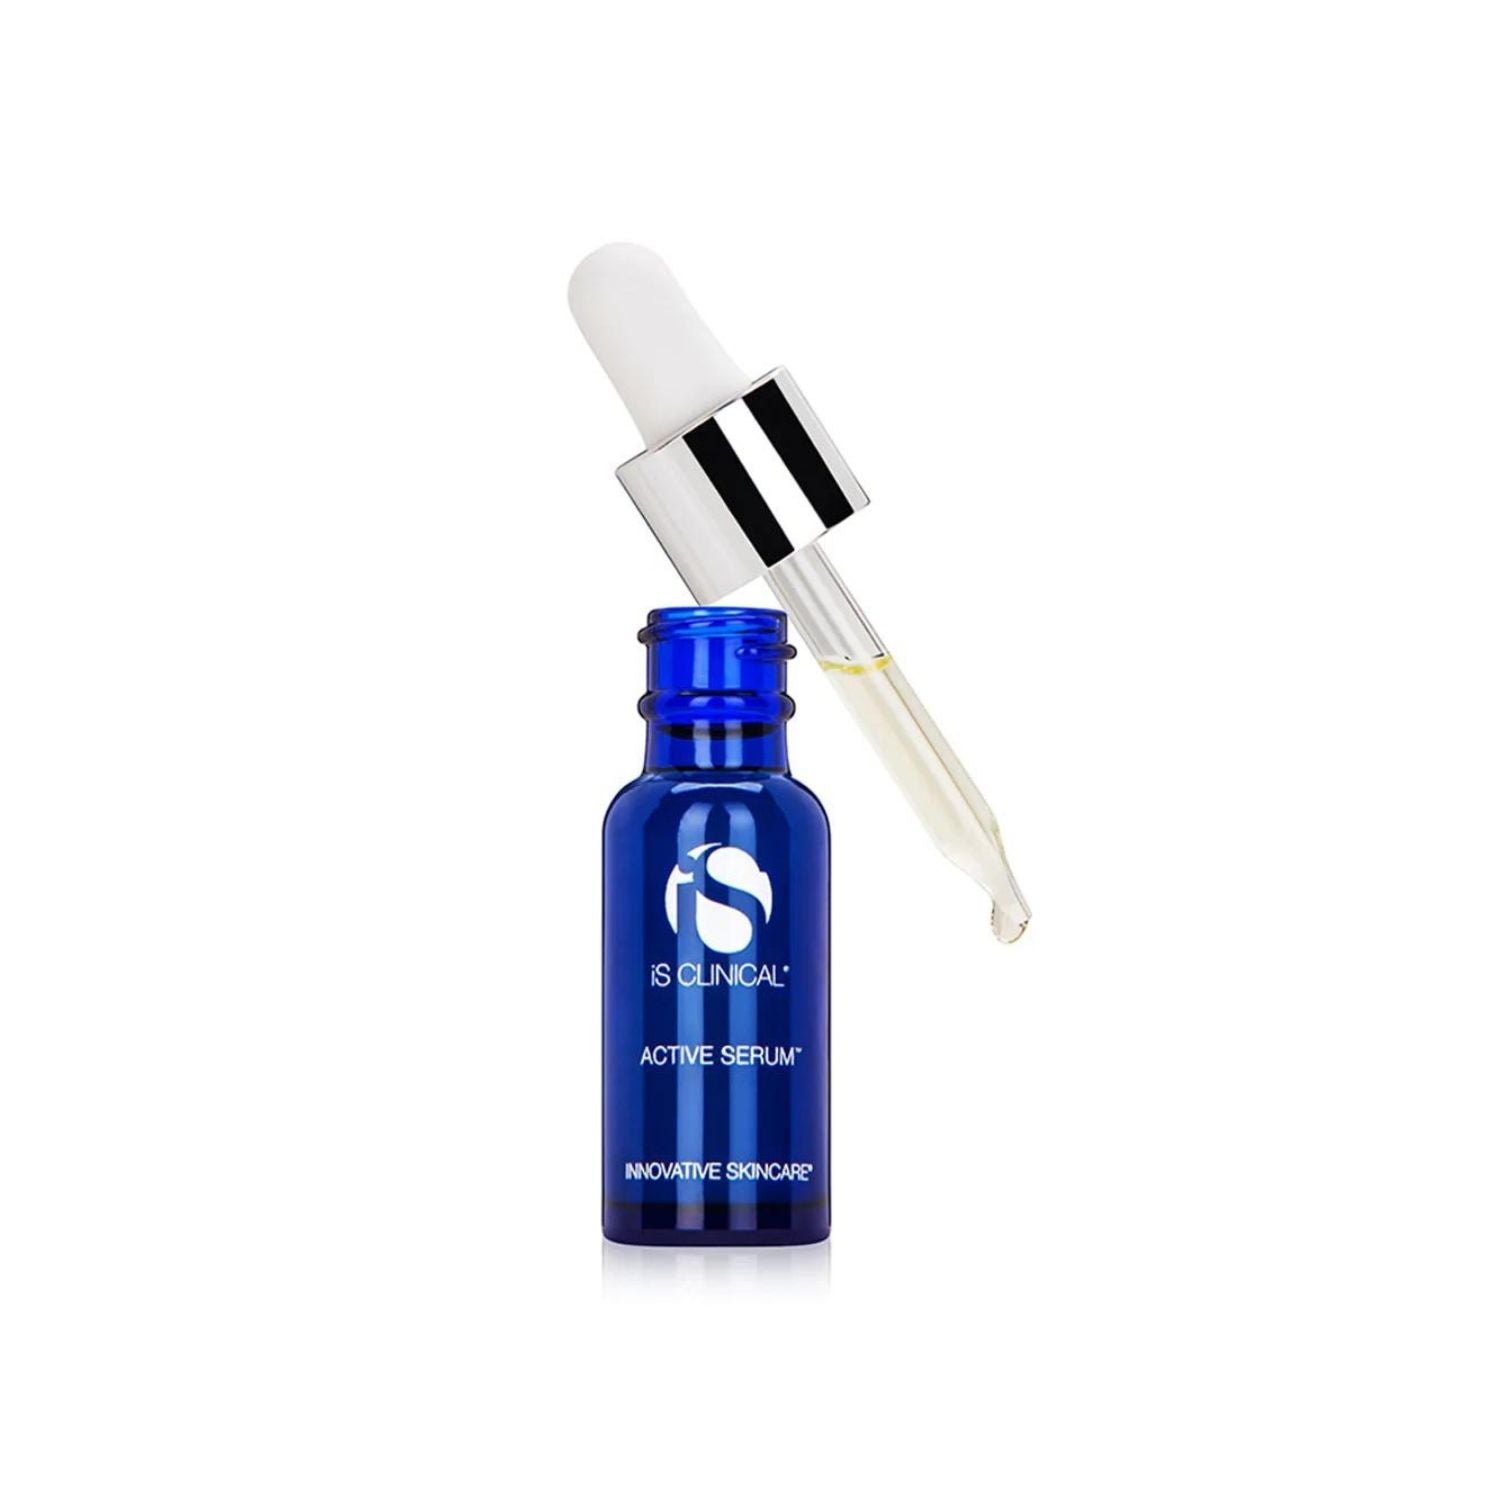 iS Clinical Active Serum 15ml - Dr. Pen Store - iS Clinical Buy Genuine Dr Pen Products with Trust